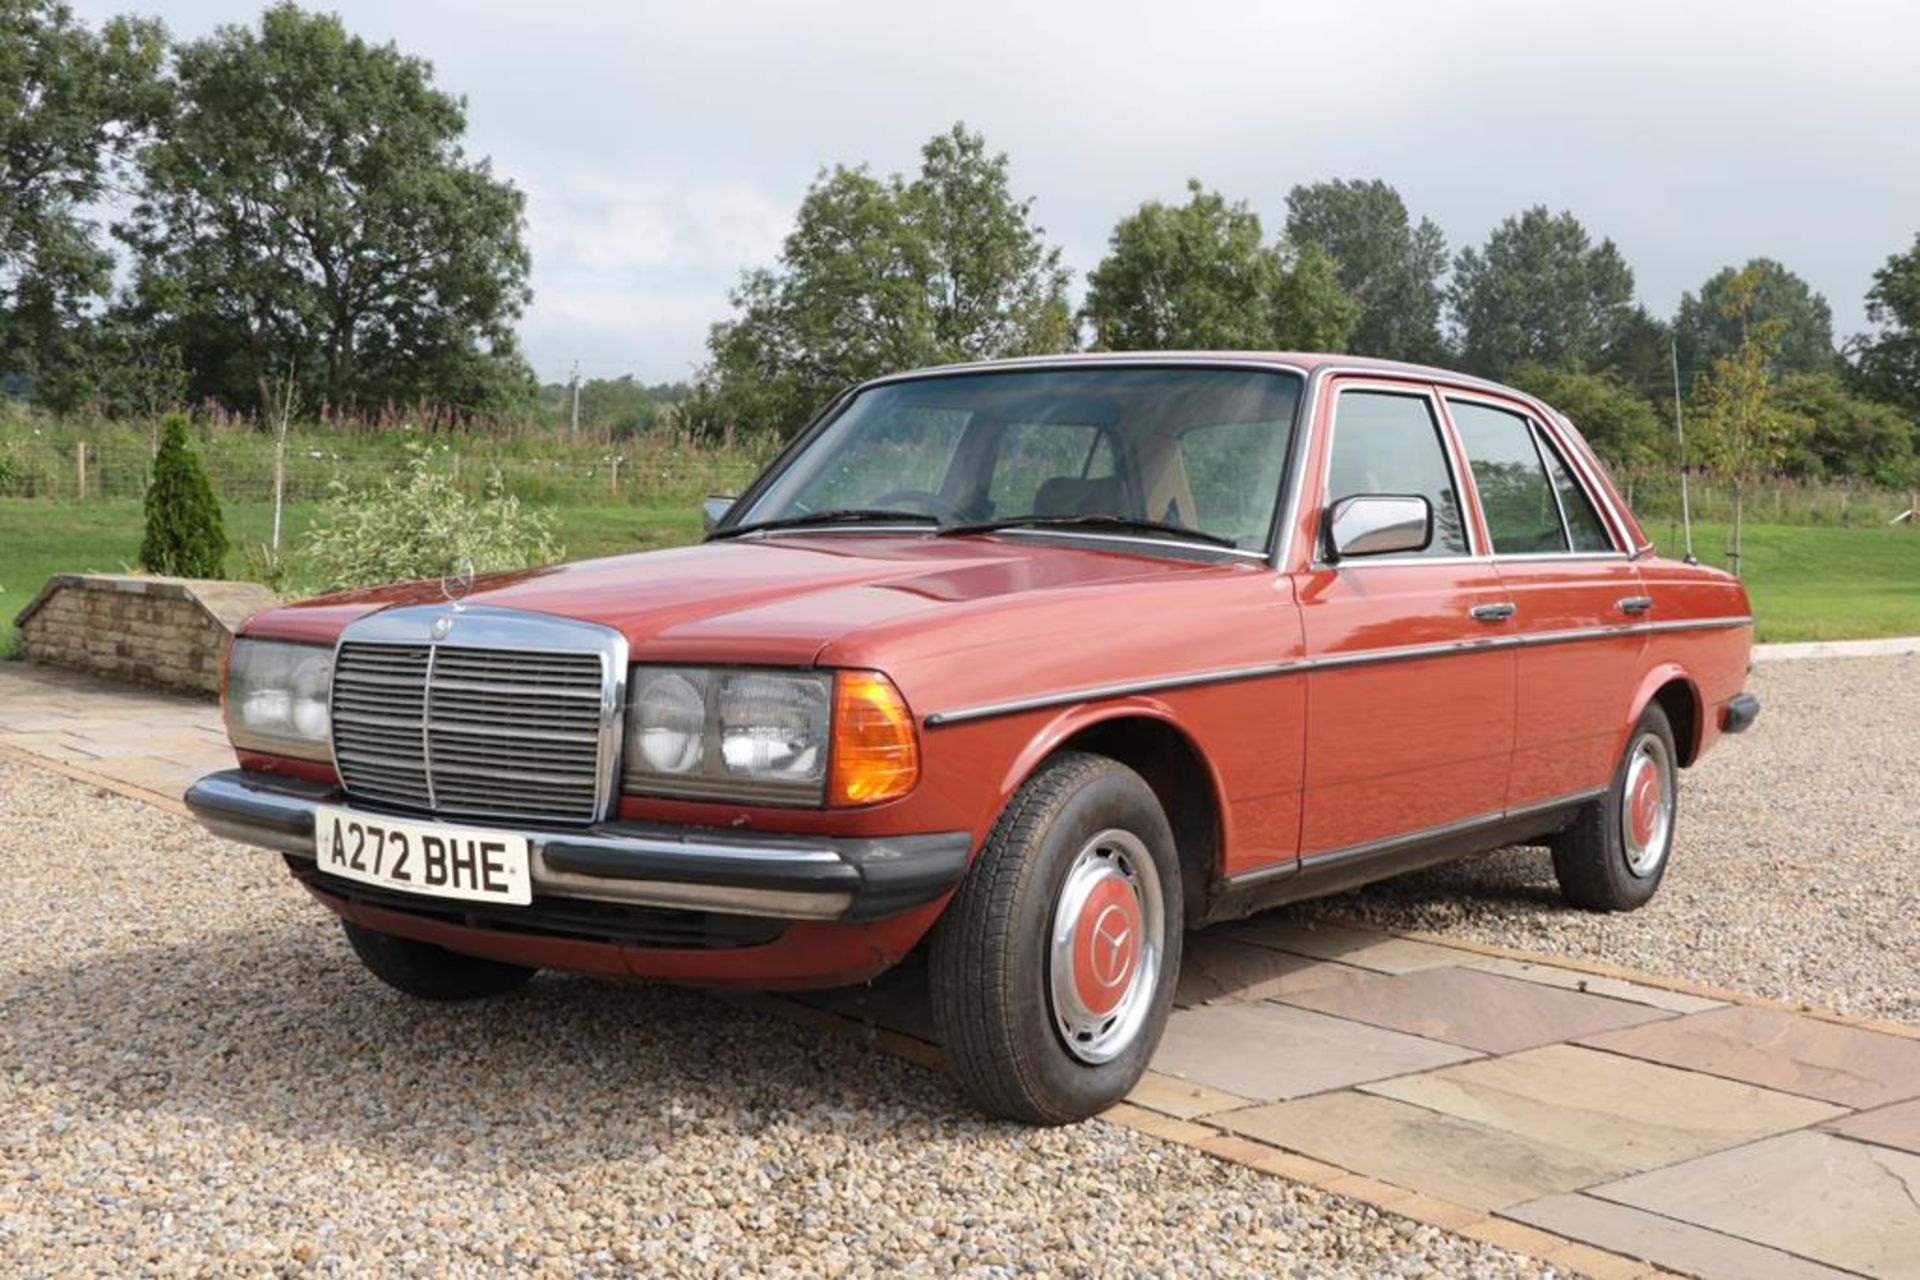 1983 Mercedes 200 Auto Registration number: A272 BHE Date of first registration: 01/12/1983 VIN